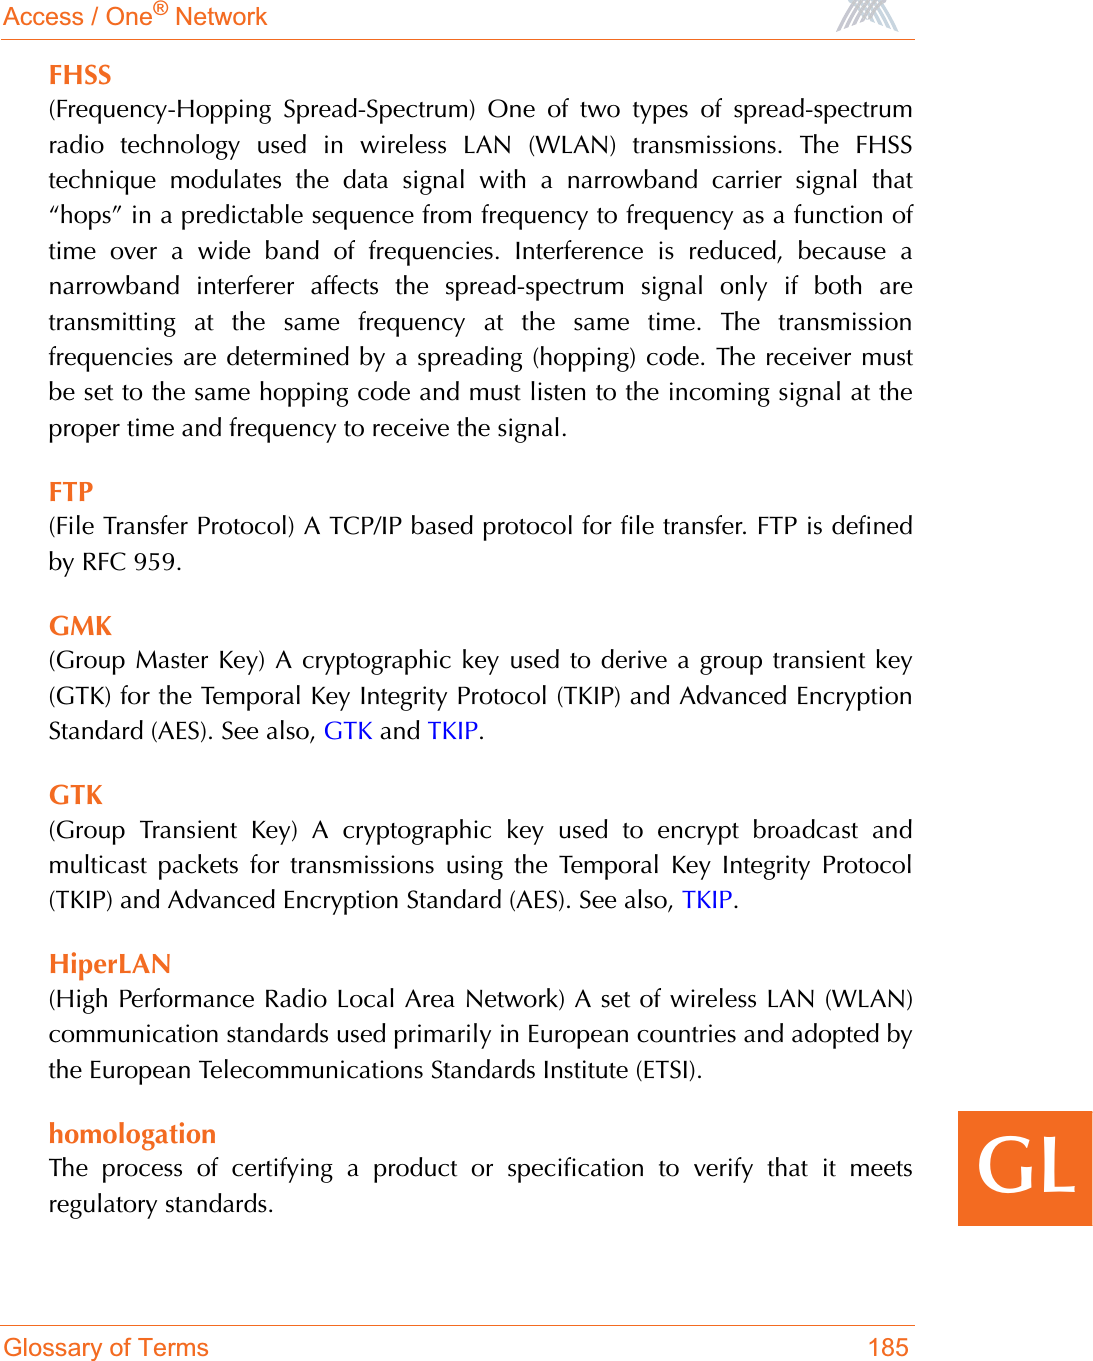 Access / One® NetworkGlossary of Terms 185GLFHSS(Frequency-Hopping Spread-Spectrum) One of two types of spread-spectrumradio technology used in wireless LAN (WLAN) transmissions. The FHSStechnique modulates the data signal with a narrowband carrier signal that“hops” in a predictable sequence from frequency to frequency as a function oftime over a wide band of frequencies. Interference is reduced, because anarrowband interferer affects the spread-spectrum signal only if both aretransmitting at the same frequency at the same time. The transmissionfrequencies are determined by a spreading (hopping) code. The receiver mustbe set to the same hopping code and must listen to the incoming signal at theproper time and frequency to receive the signal.FTP(File Transfer Protocol) A TCP/IP based protocol for file transfer. FTP is definedby RFC 959.GMK(Group Master Key) A cryptographic key used to derive a group transient key(GTK) for the Temporal Key Integrity Protocol (TKIP) and Advanced EncryptionStandard (AES). See also, GTK and TKIP.GTK(Group Transient Key) A cryptographic key used to encrypt broadcast andmulticast packets for transmissions using the Temporal Key Integrity Protocol(TKIP) and Advanced Encryption Standard (AES). See also, TKIP.HiperLAN(High Performance Radio Local Area Network) A set of wireless LAN (WLAN)communication standards used primarily in European countries and adopted bythe European Telecommunications Standards Institute (ETSI). homologationThe process of certifying a product or specification to verify that it meetsregulatory standards.